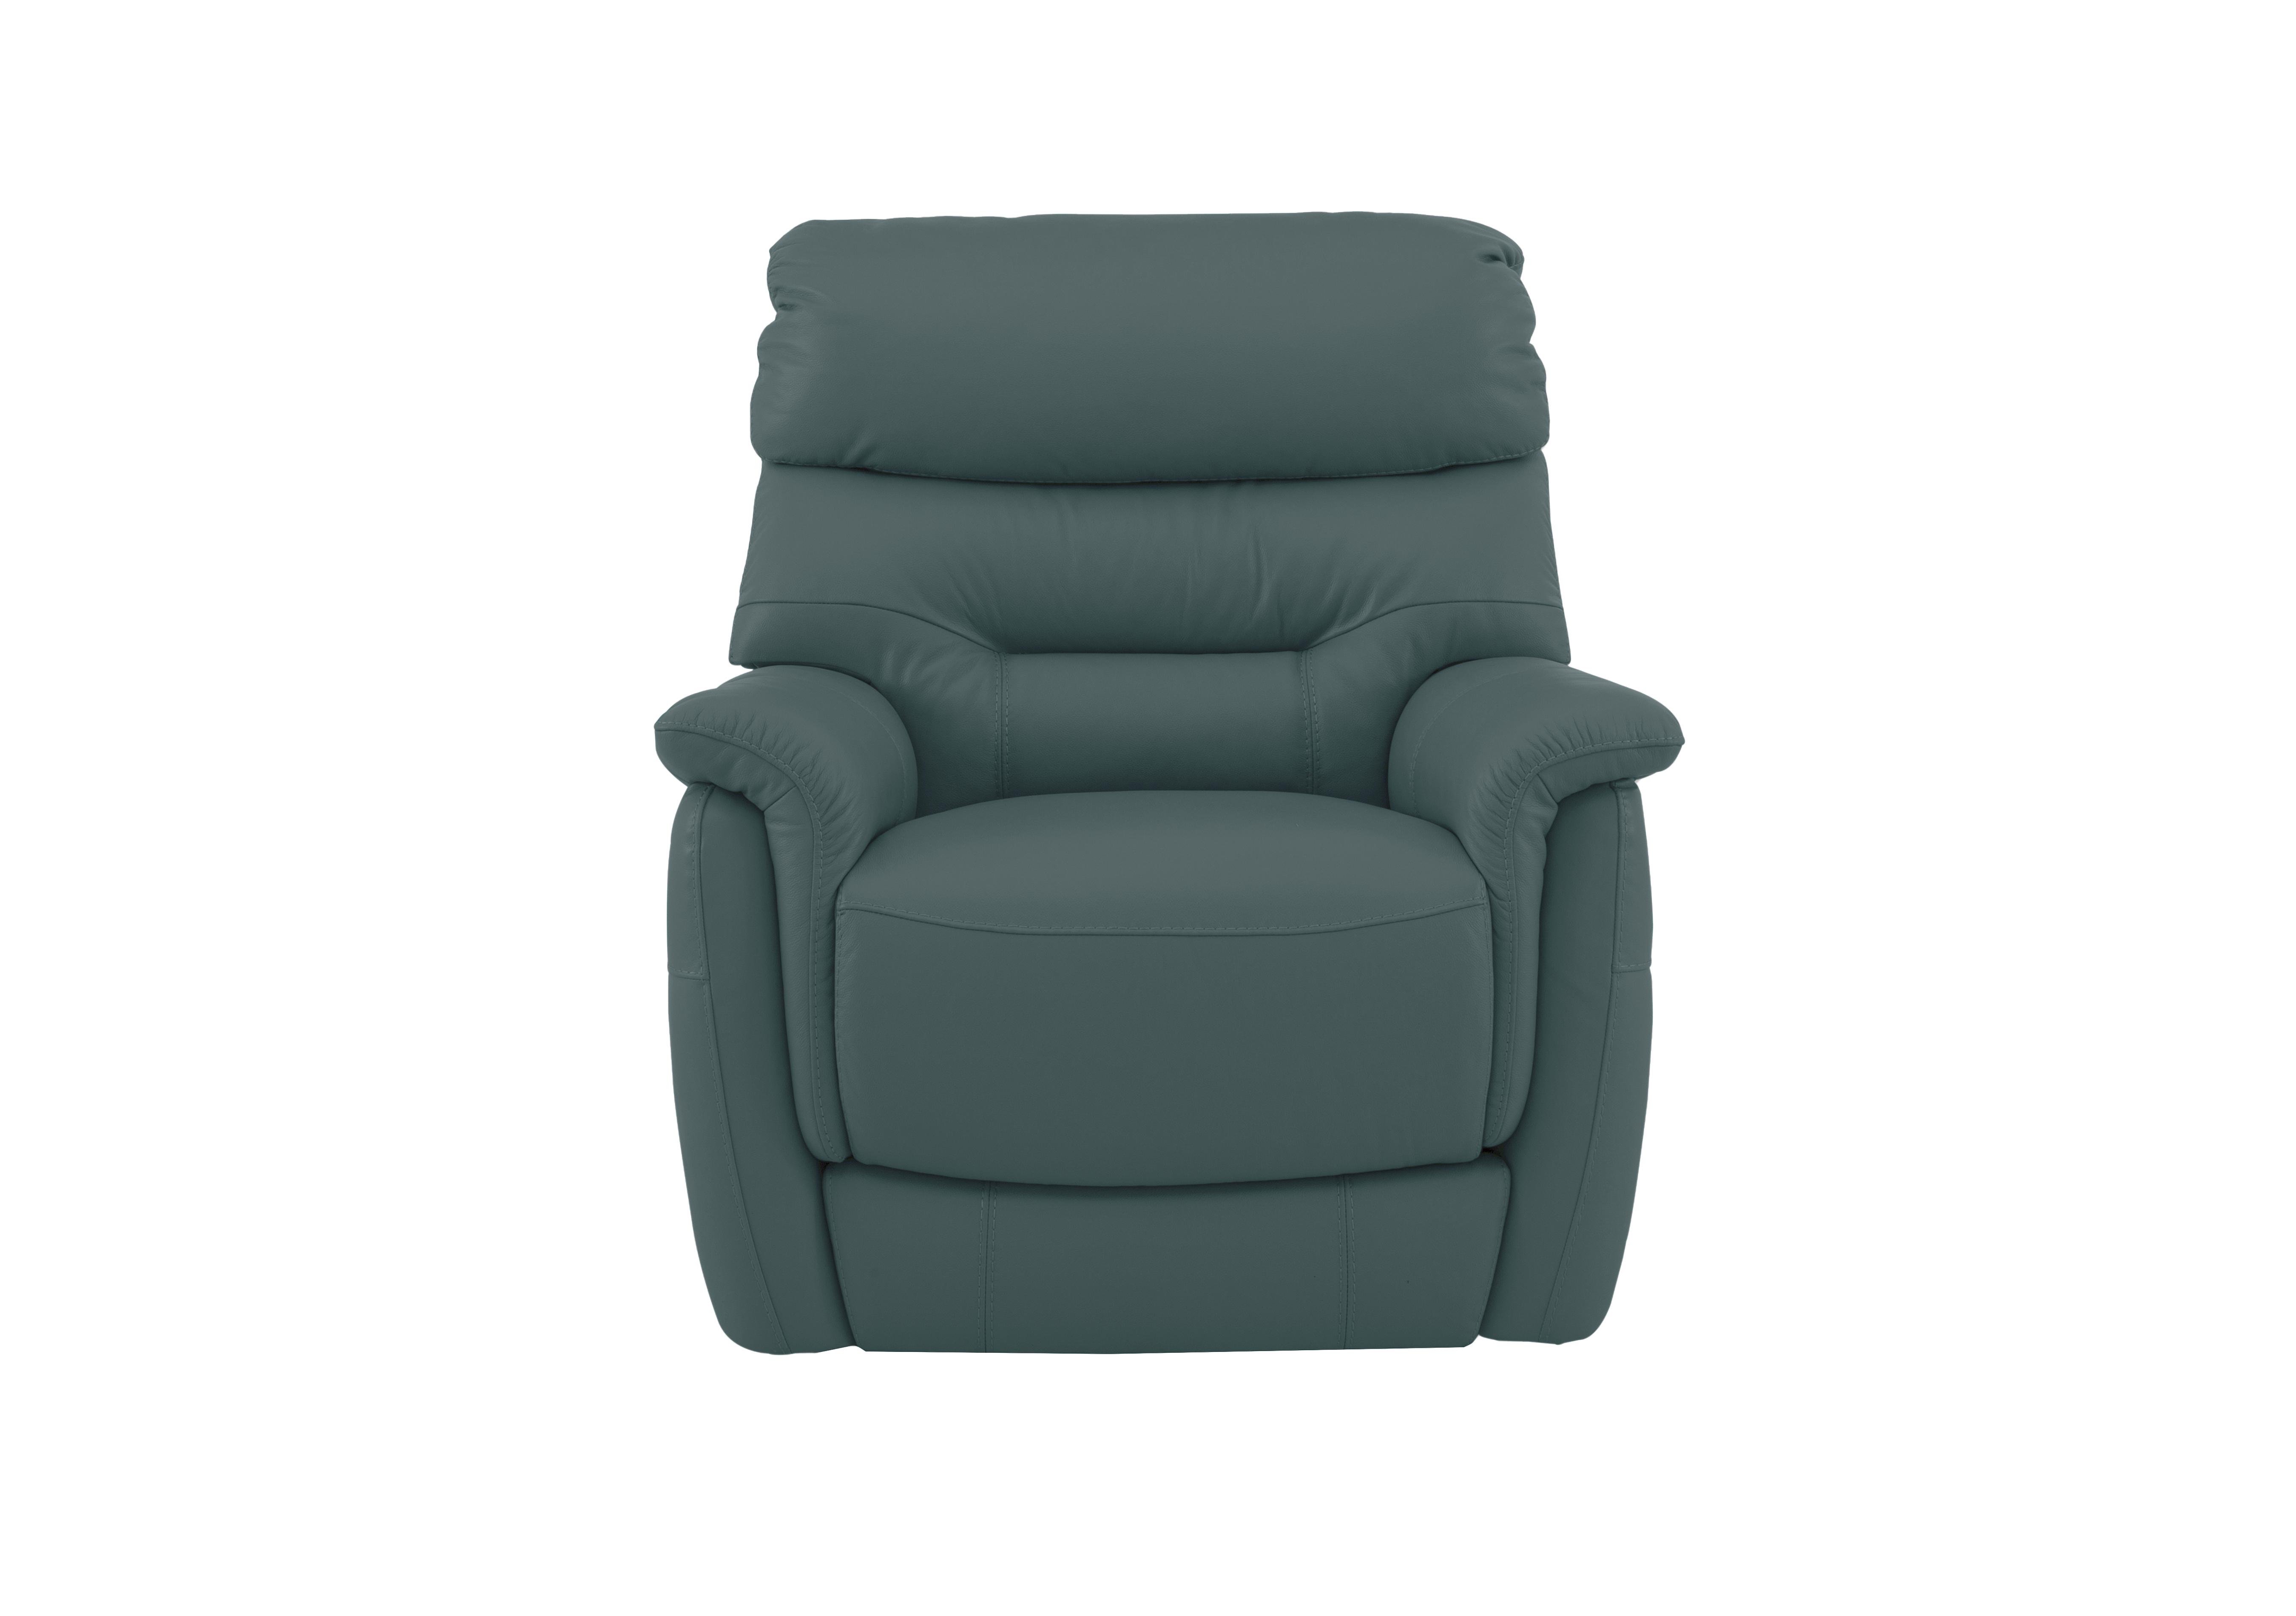 Chicago Leather Armchair in Bv-301e Lake Green on Furniture Village